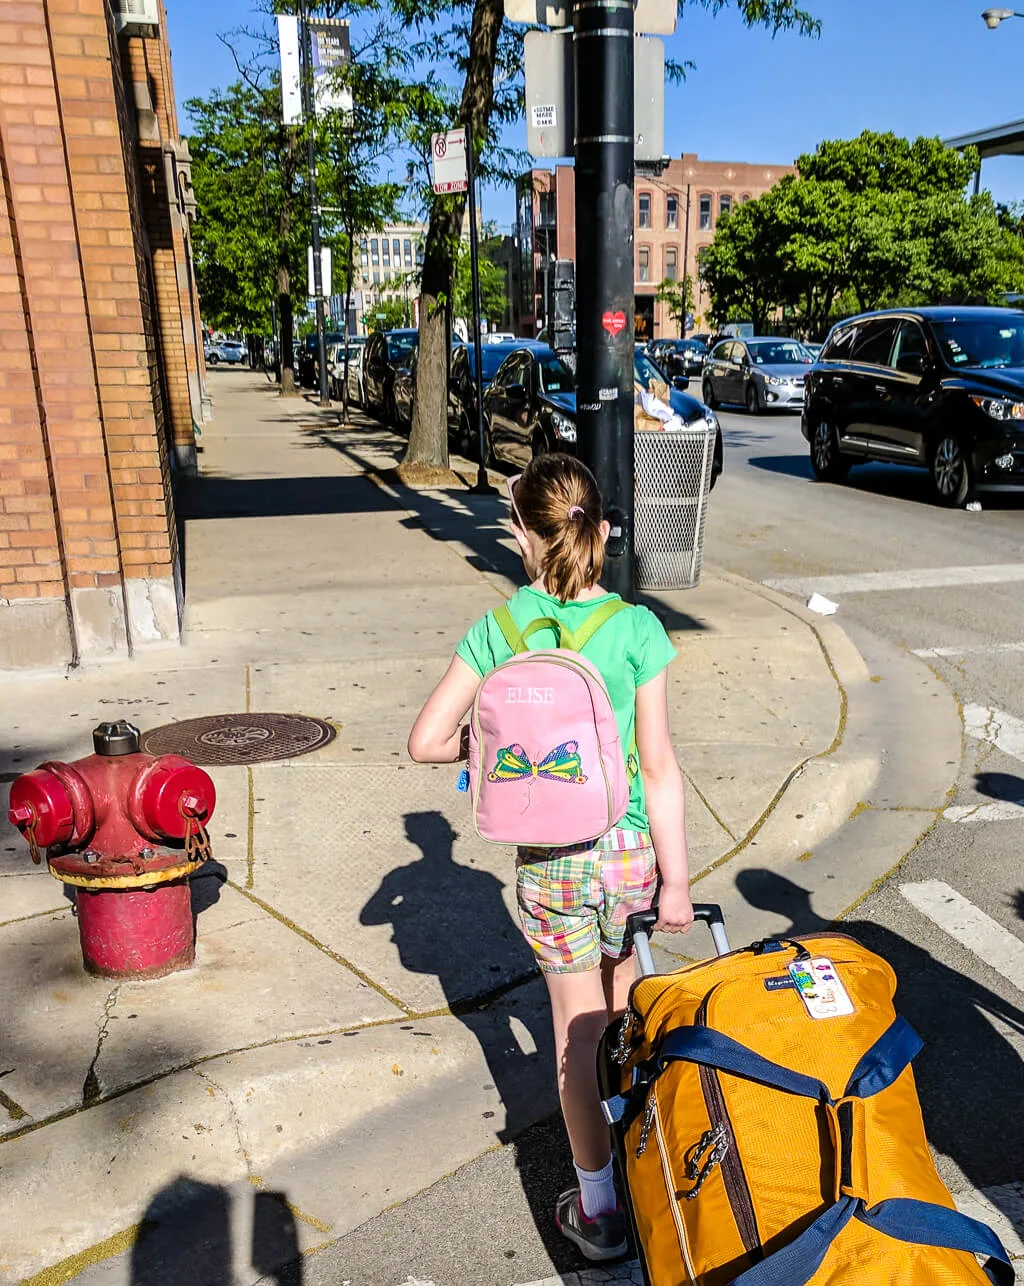 On the way to the bus to go to summer camp